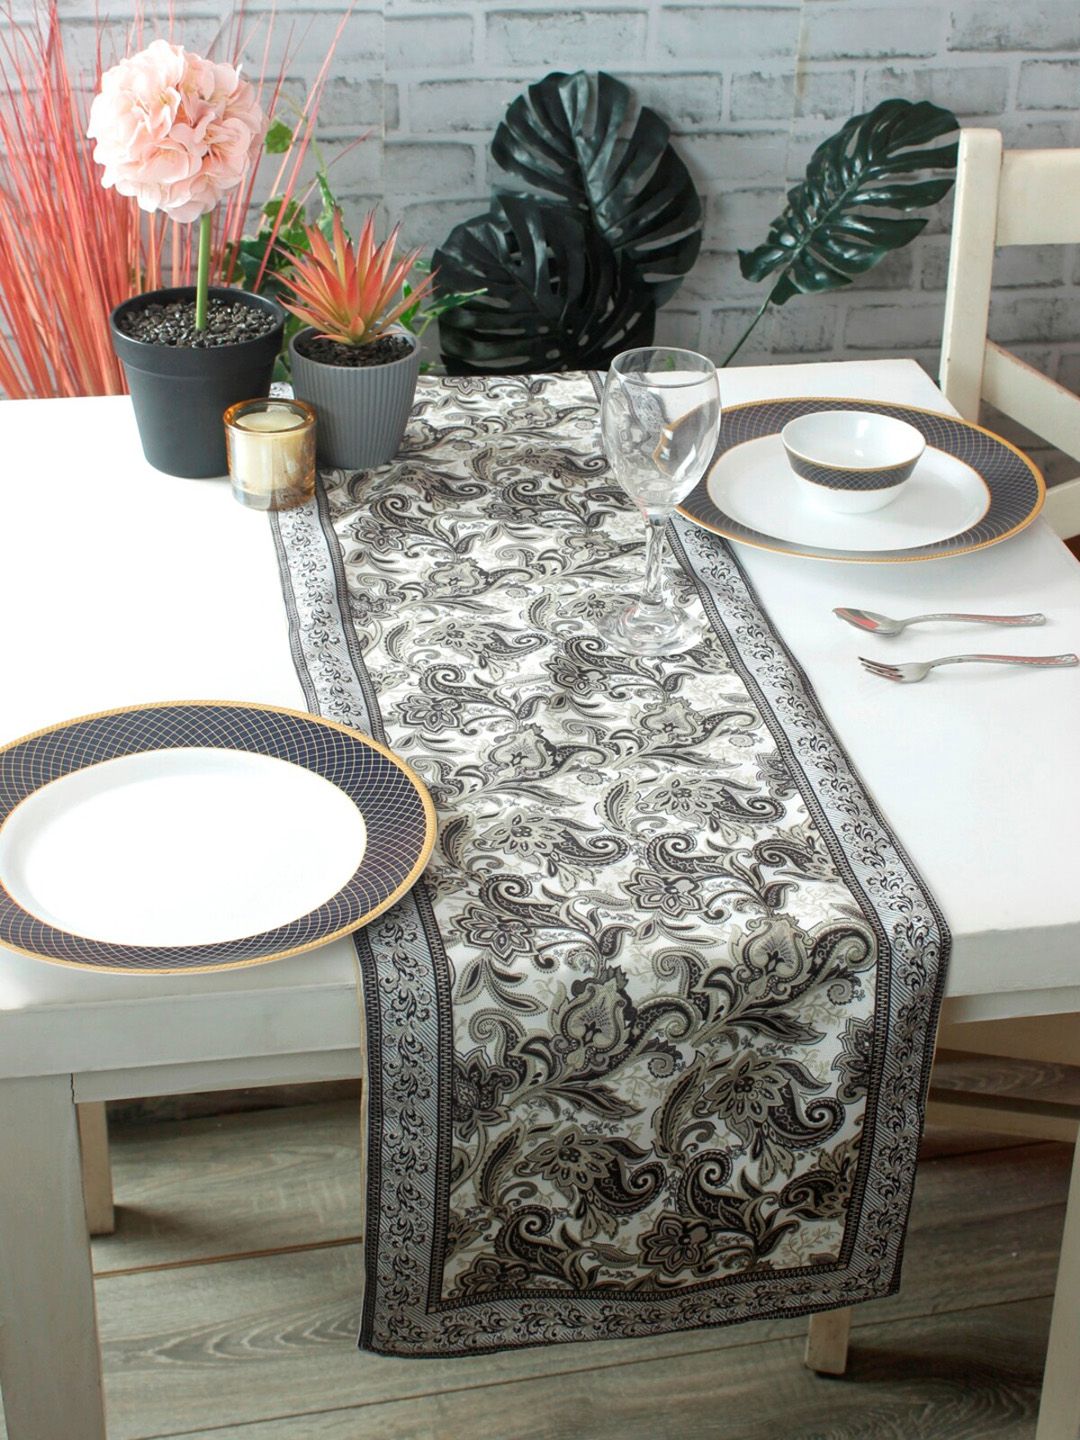 ROMEE Unisex Off-White & Black Paisley Printed Table Runner Price in India